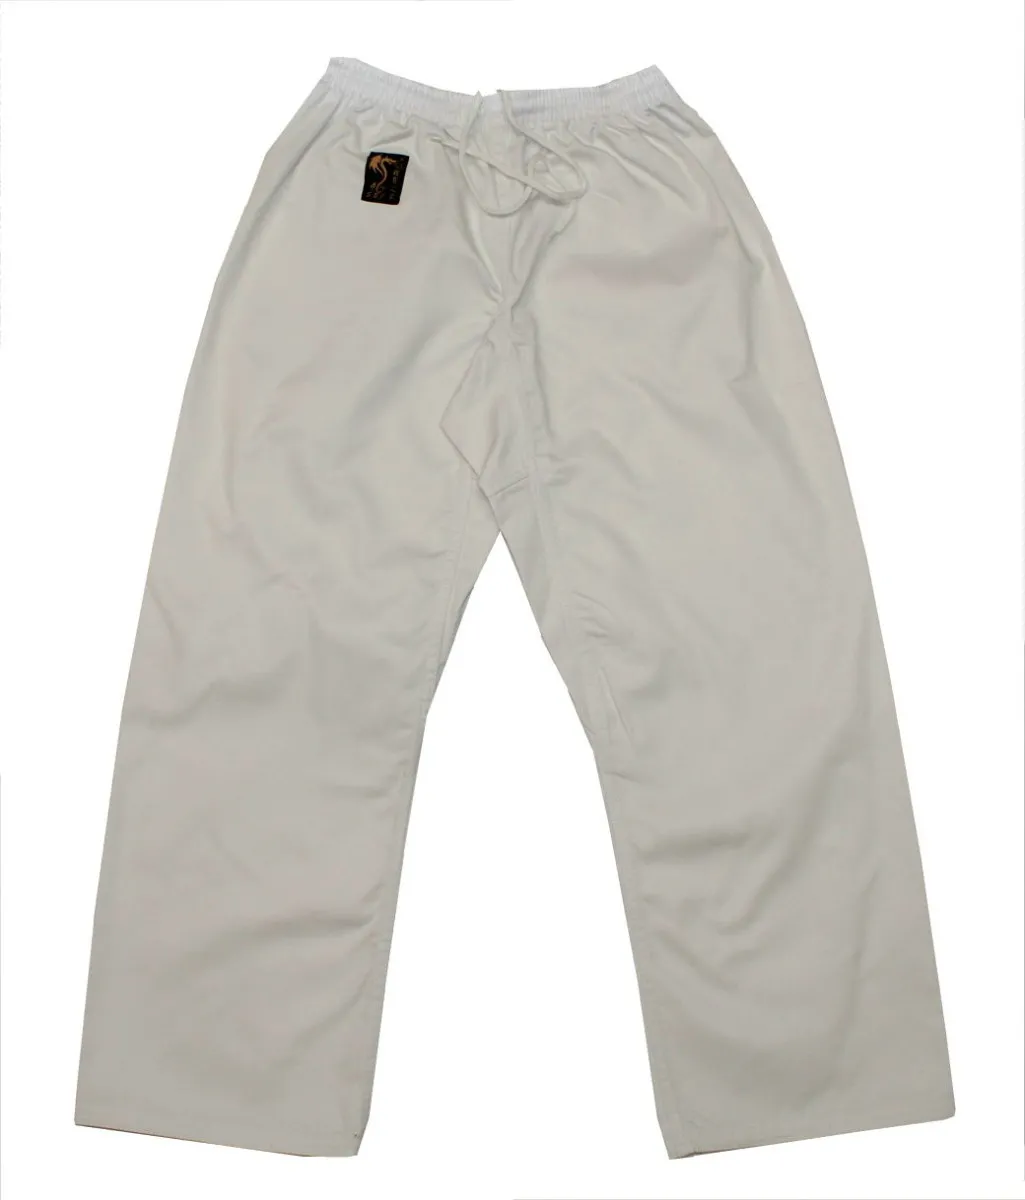 Martial arts trousers | karate trousers white